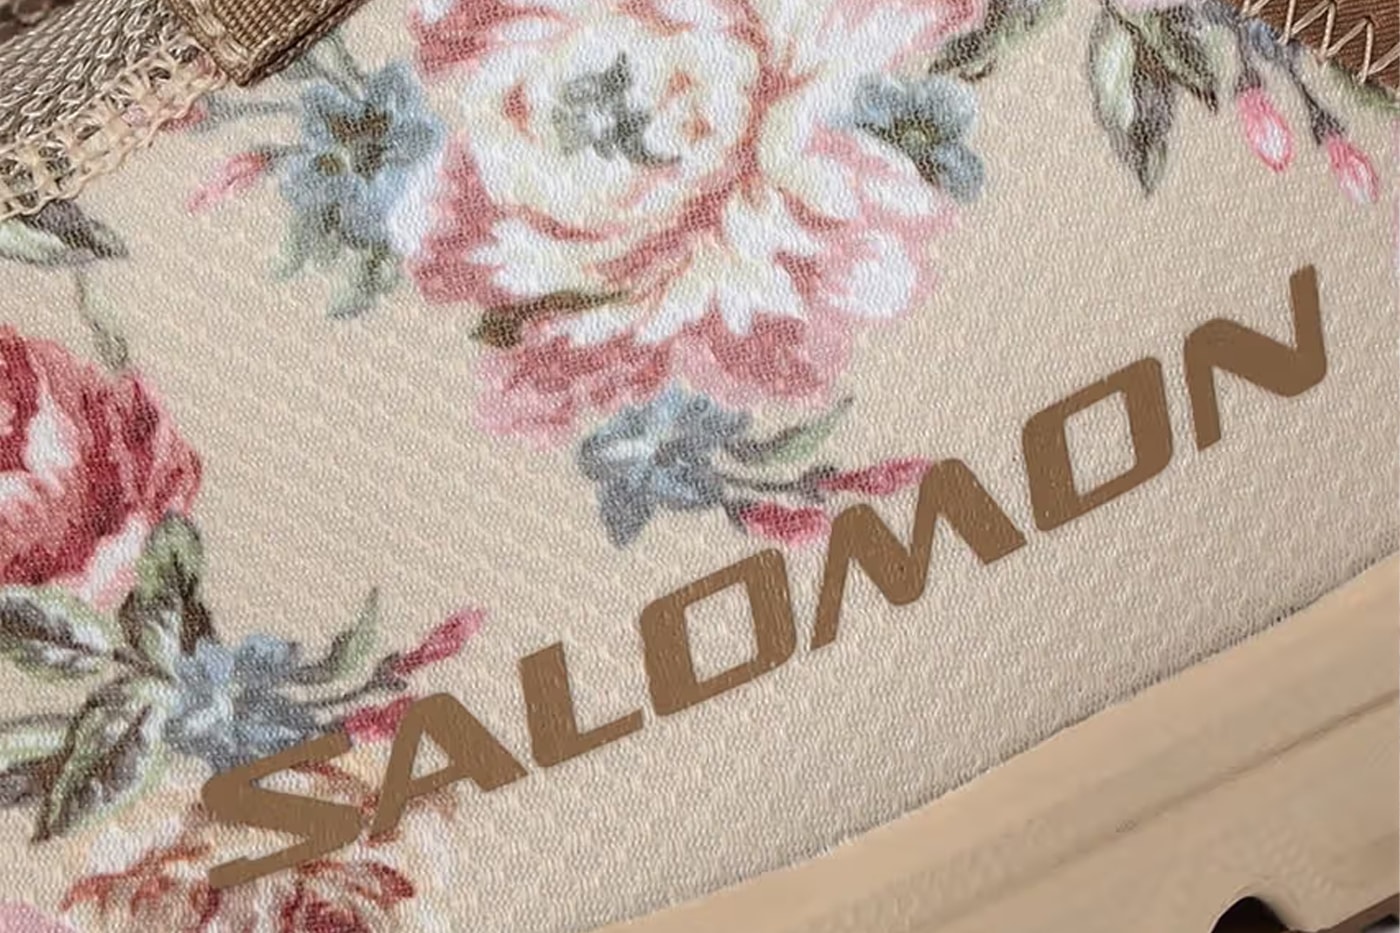 beams salomon rx slide 3 floral flowers tan release date info store list buying guide photos price 